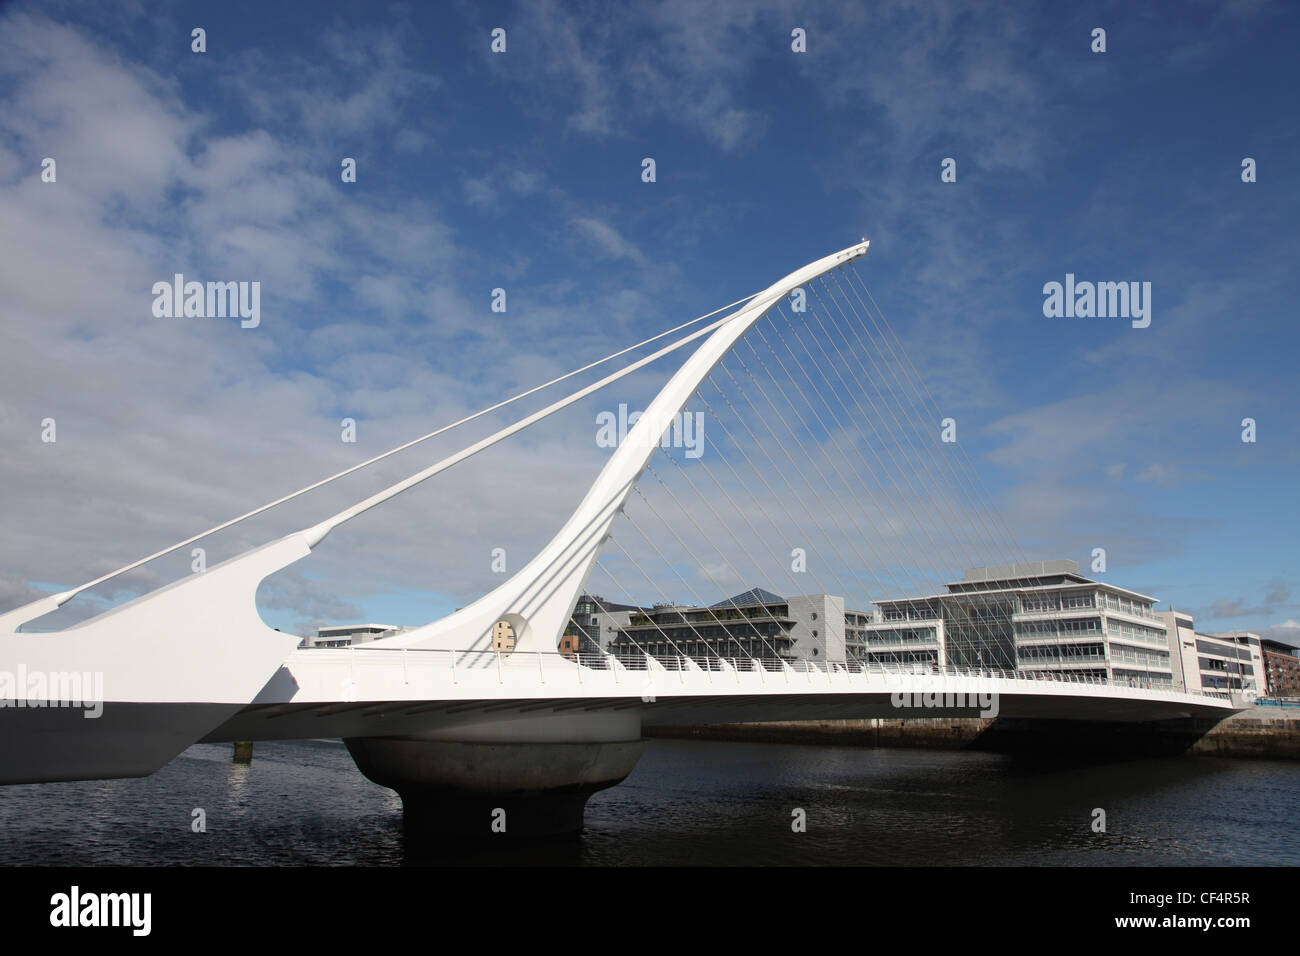 Samuel Beckett Bridge, a cable-stayed bridge that joins Sir John Rogerson's Quay to North Wall Quay across the River Liffey. The Stock Photo